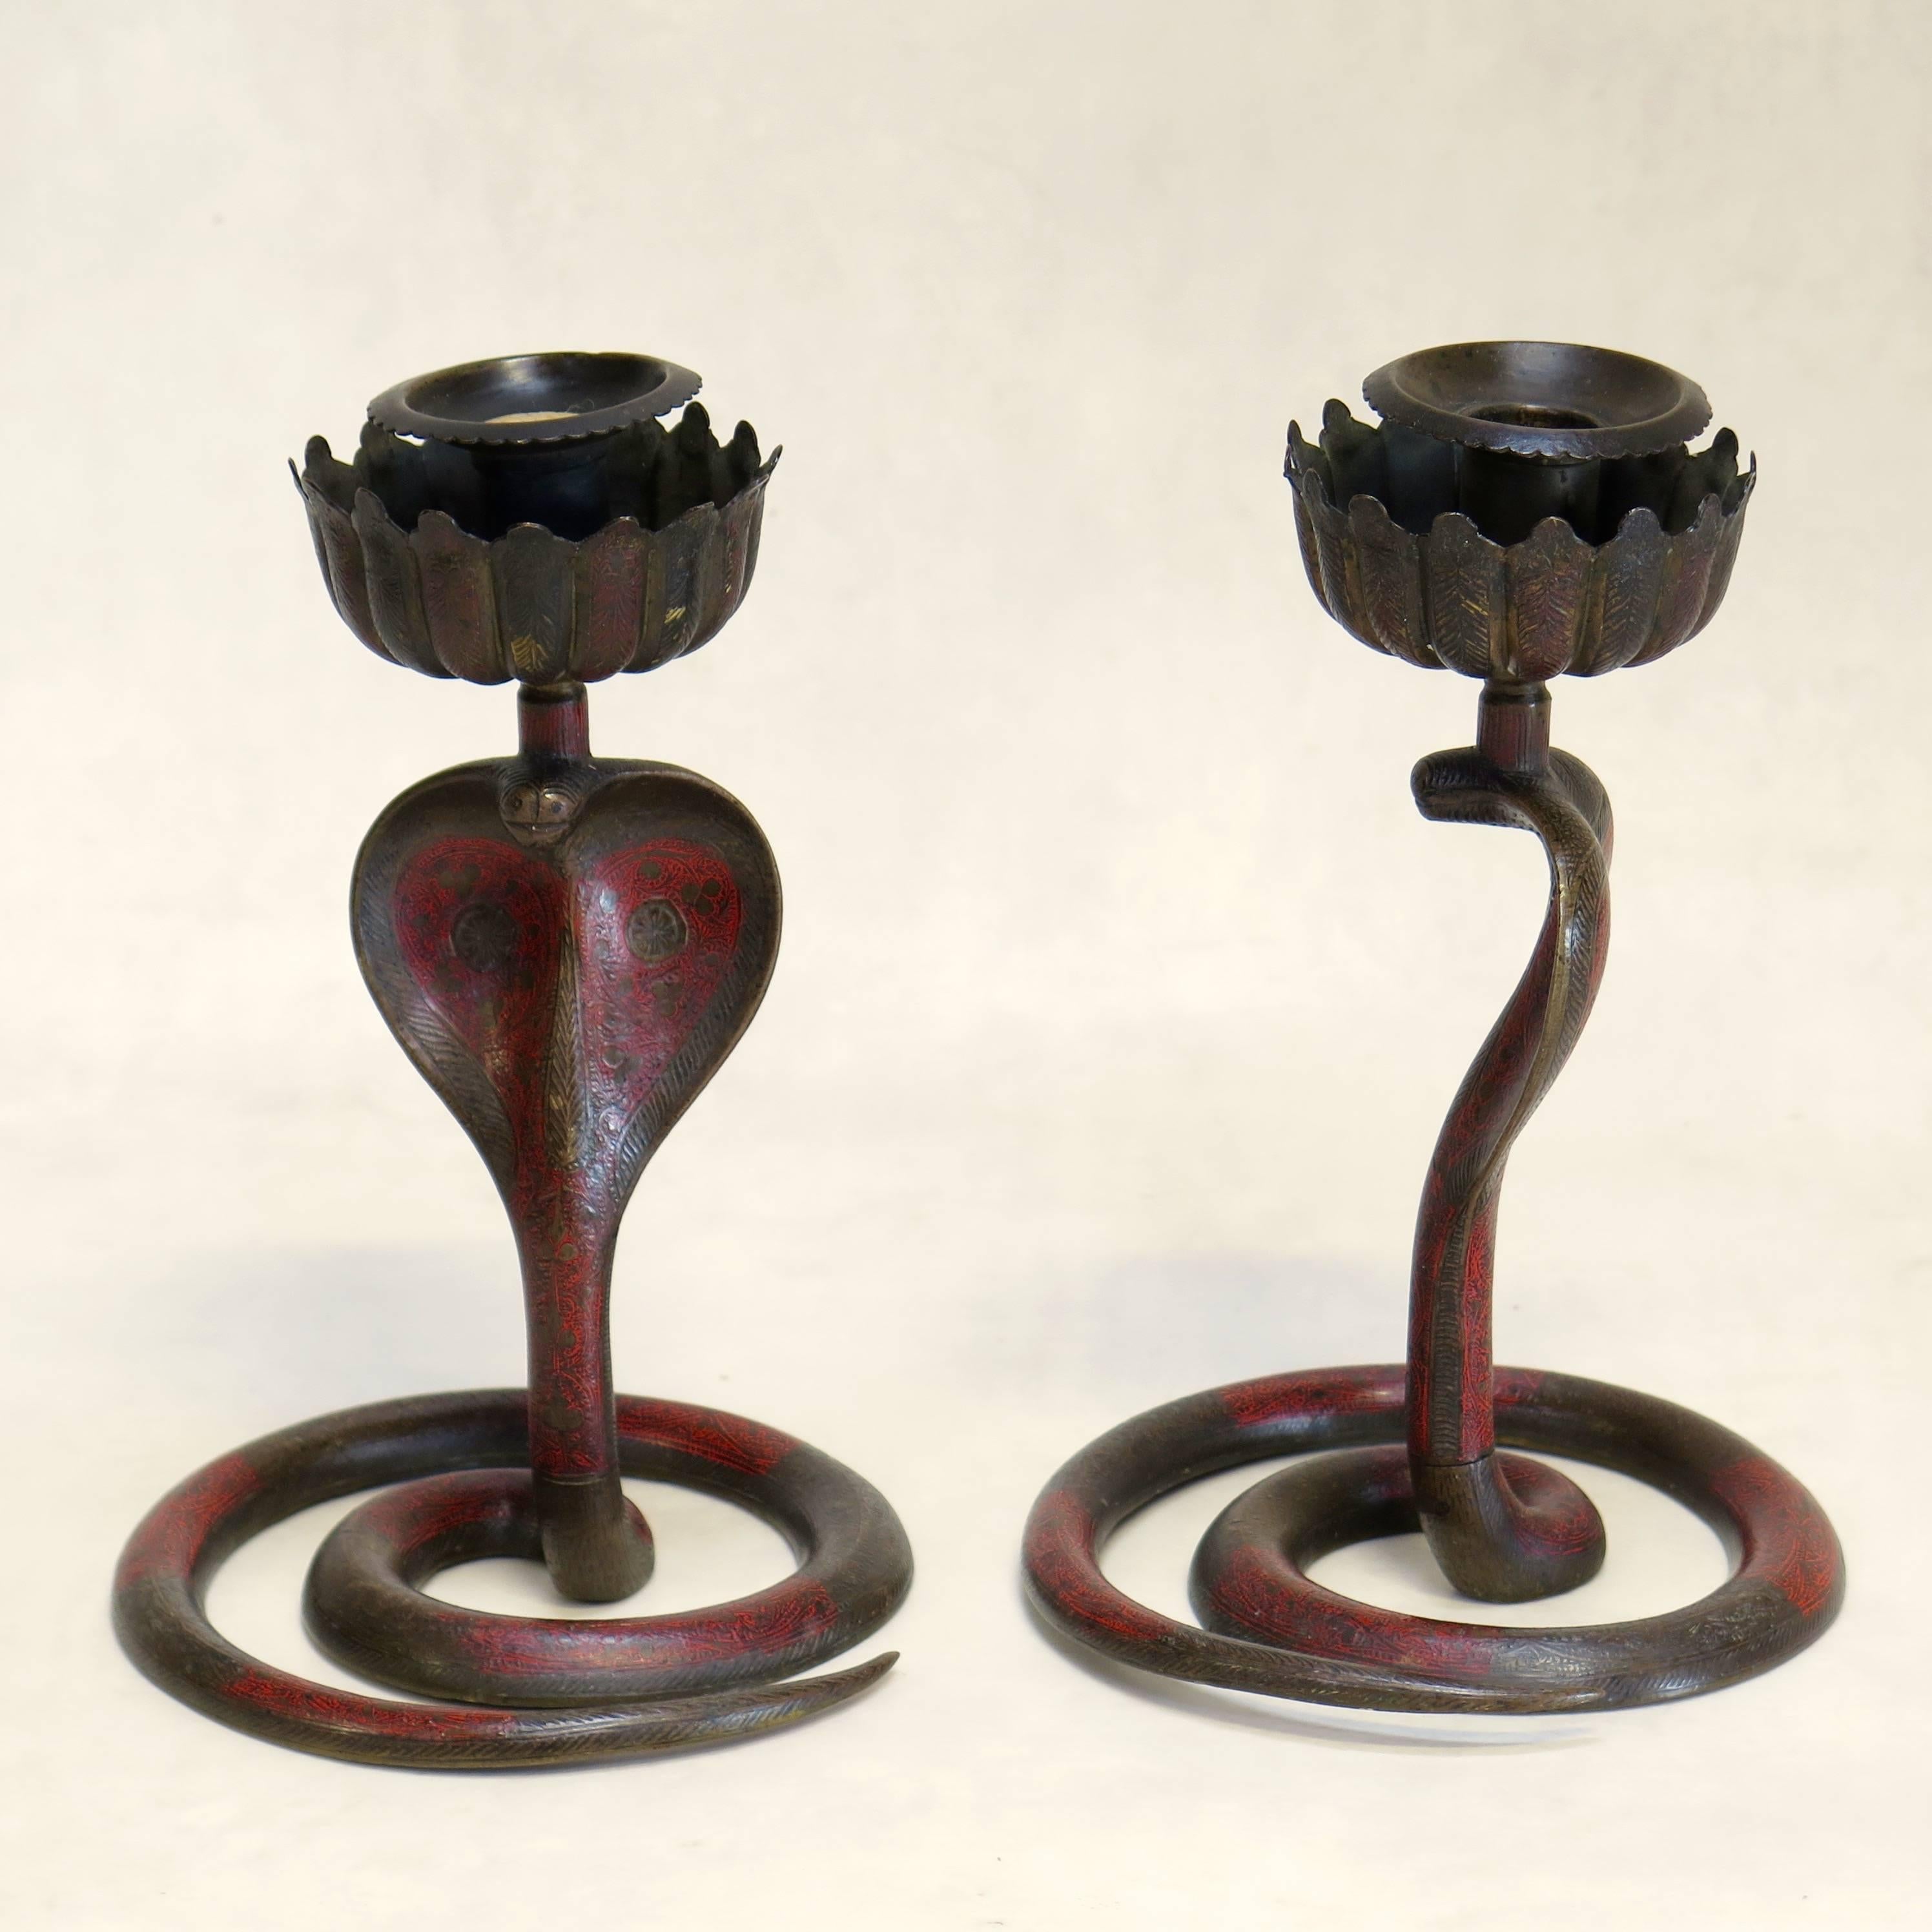 Exotic pair of brass candlesticks with intricate etched pattern and red enamel finish.